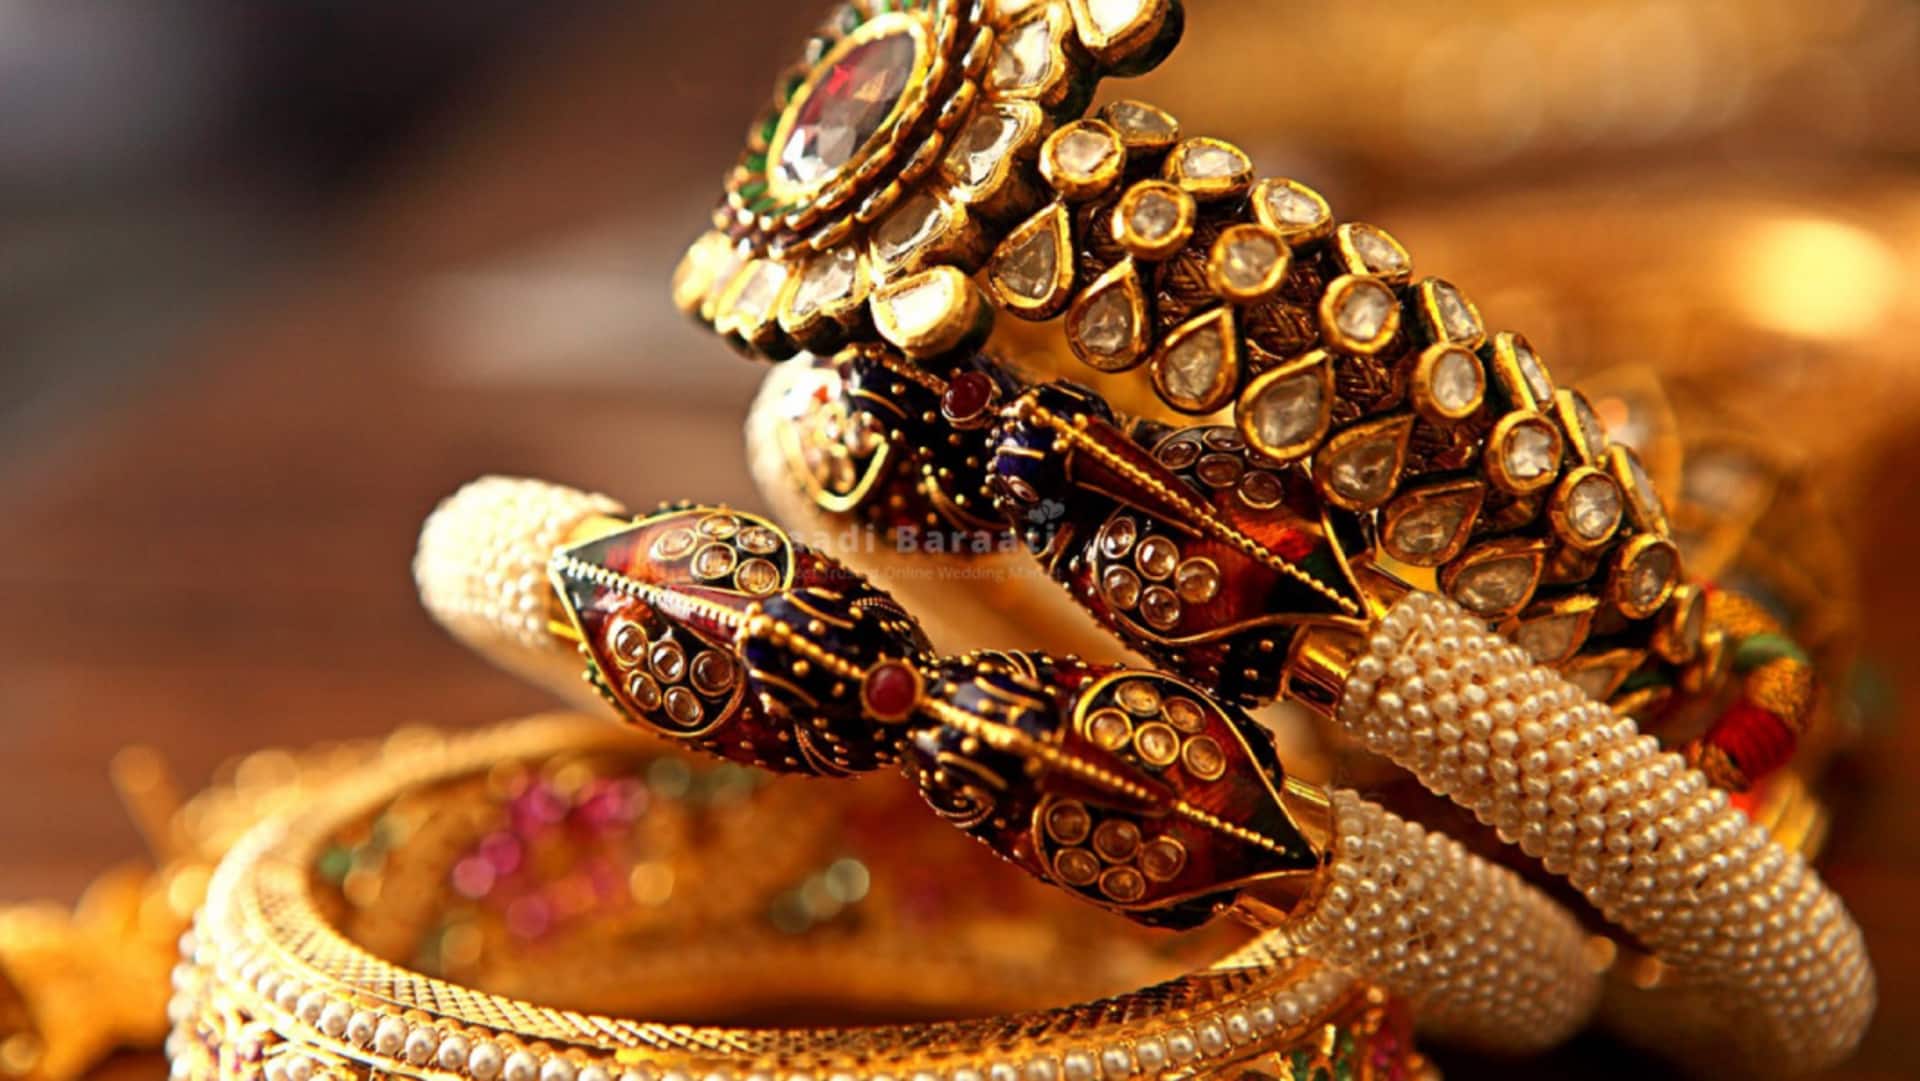 How to avoid capital gains tax on jewelry sale?